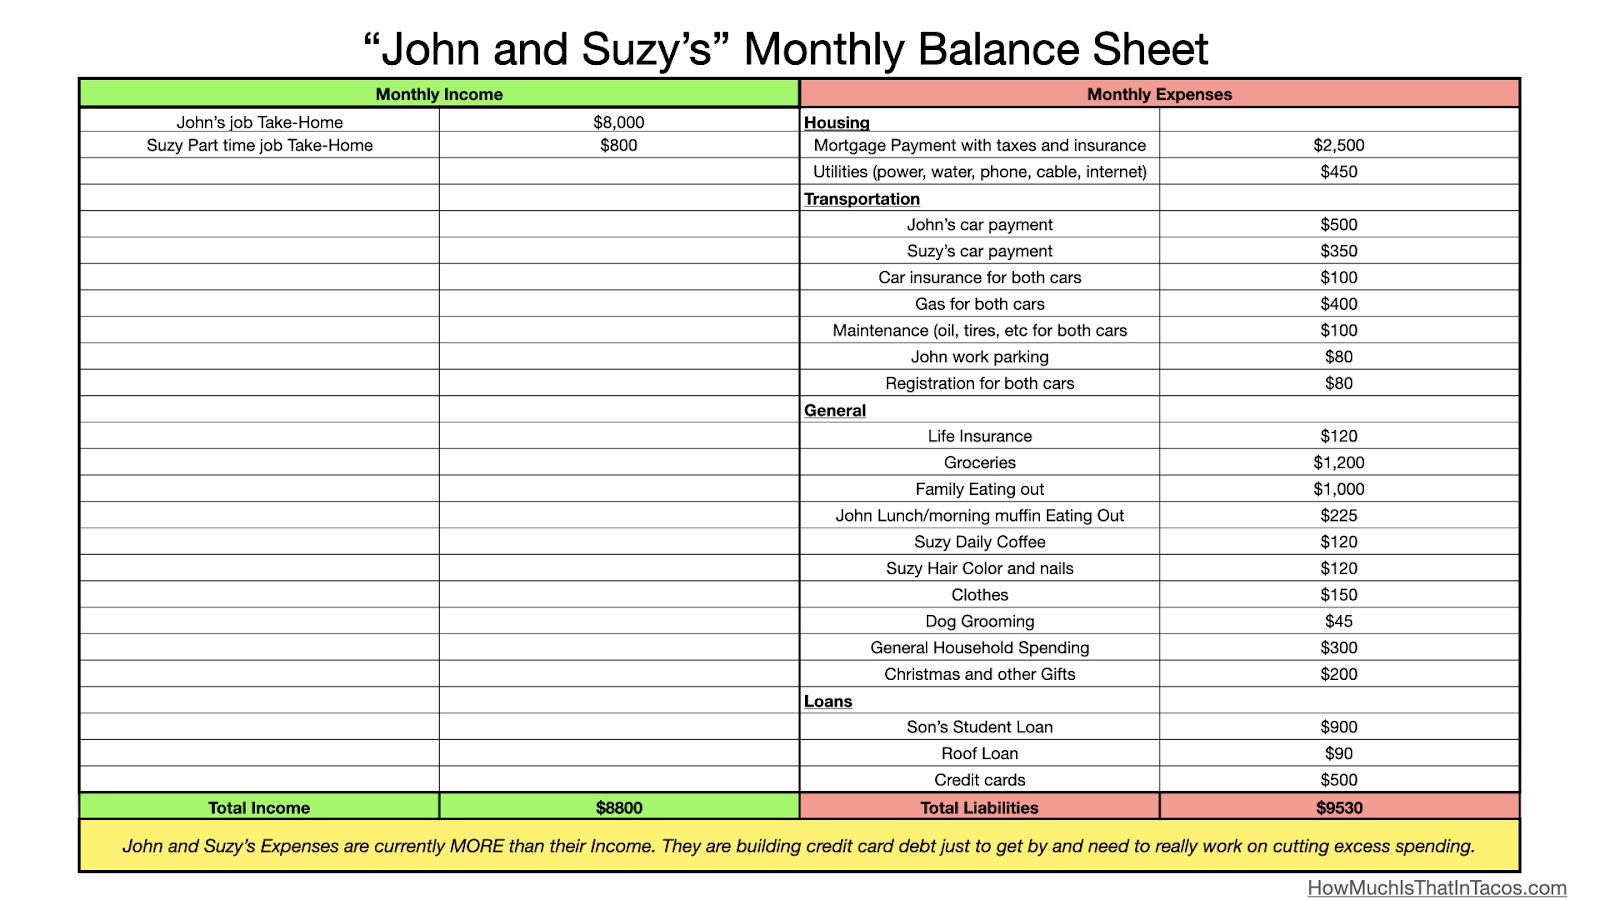 Sample Monthly Balance Sheet for "John and Suzy"